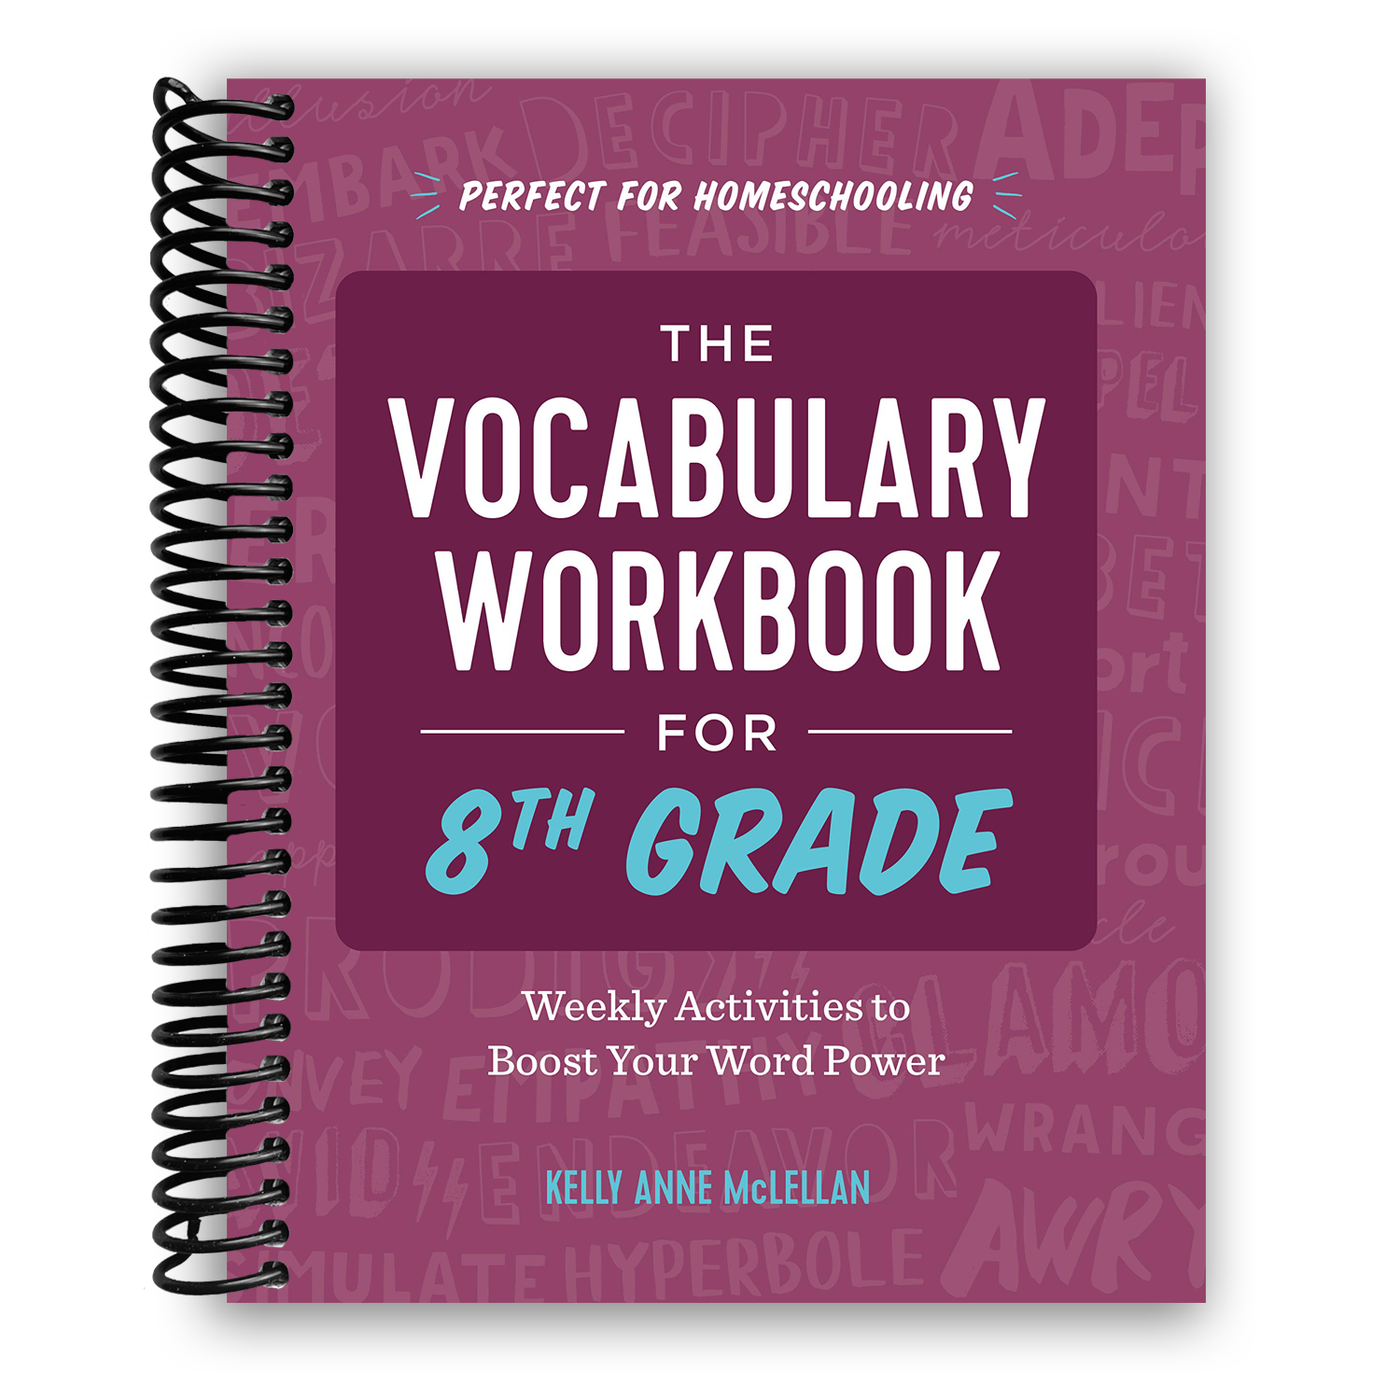 The Vocabulary Workbook for 8th Grade: Weekly Activities to Boost Your Word Power (Spiral Bound)